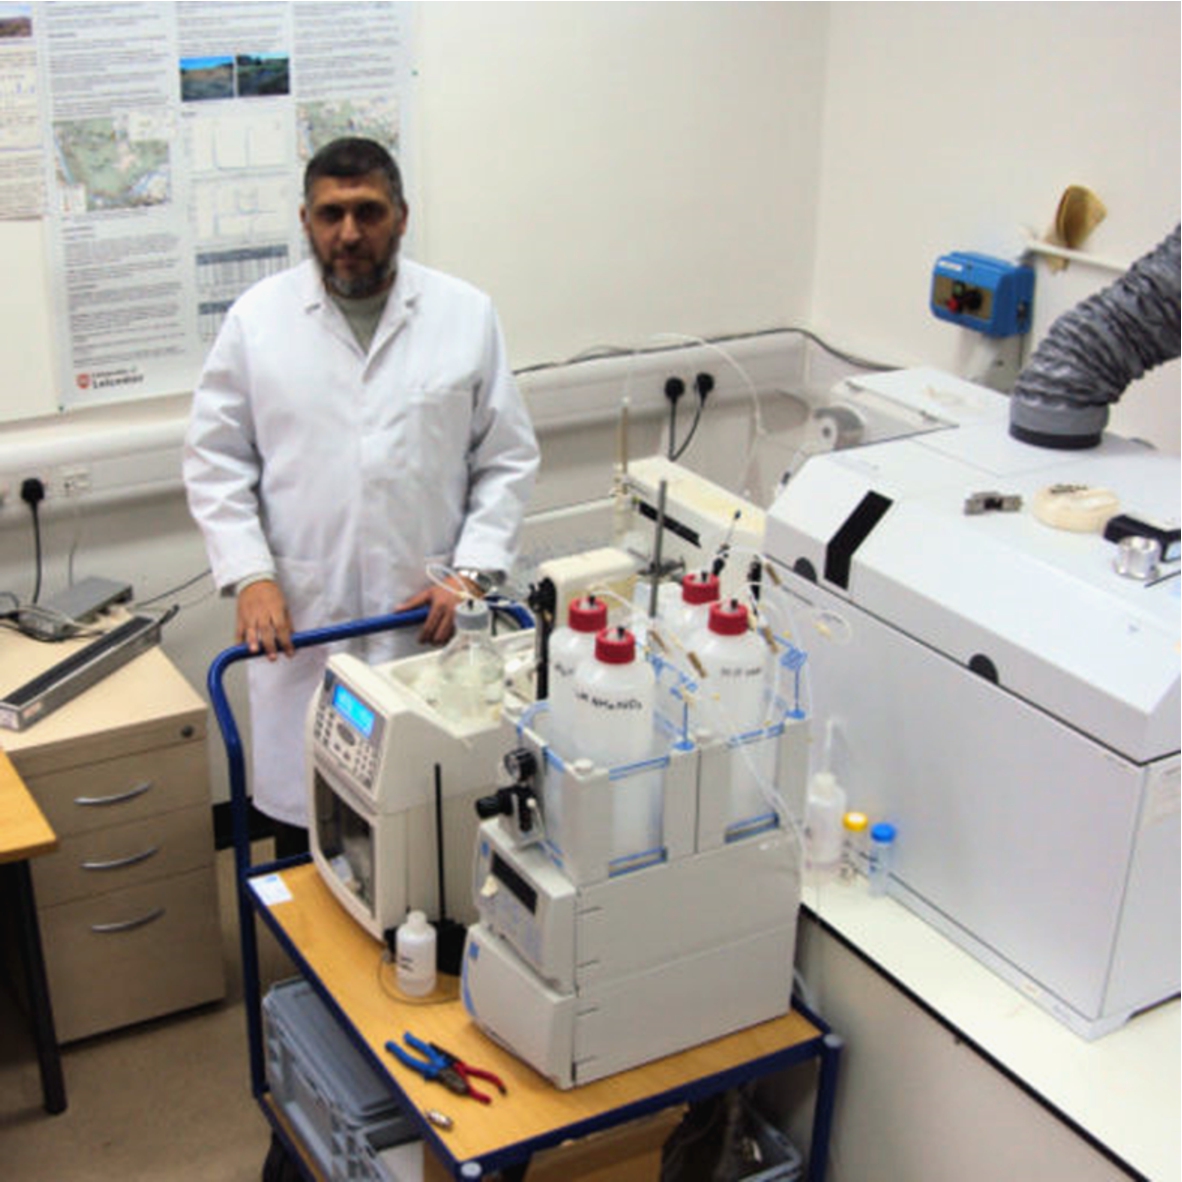 Dr. Shaban Al-Rmalli was an outstanding bioanalytical chemist who was experienced in the use of many different analytical techniques including ICP-MS. This picture shows him working in the lab carrying out HPLC-ICP-MS analysis. The photograph was taken in ∼2010.